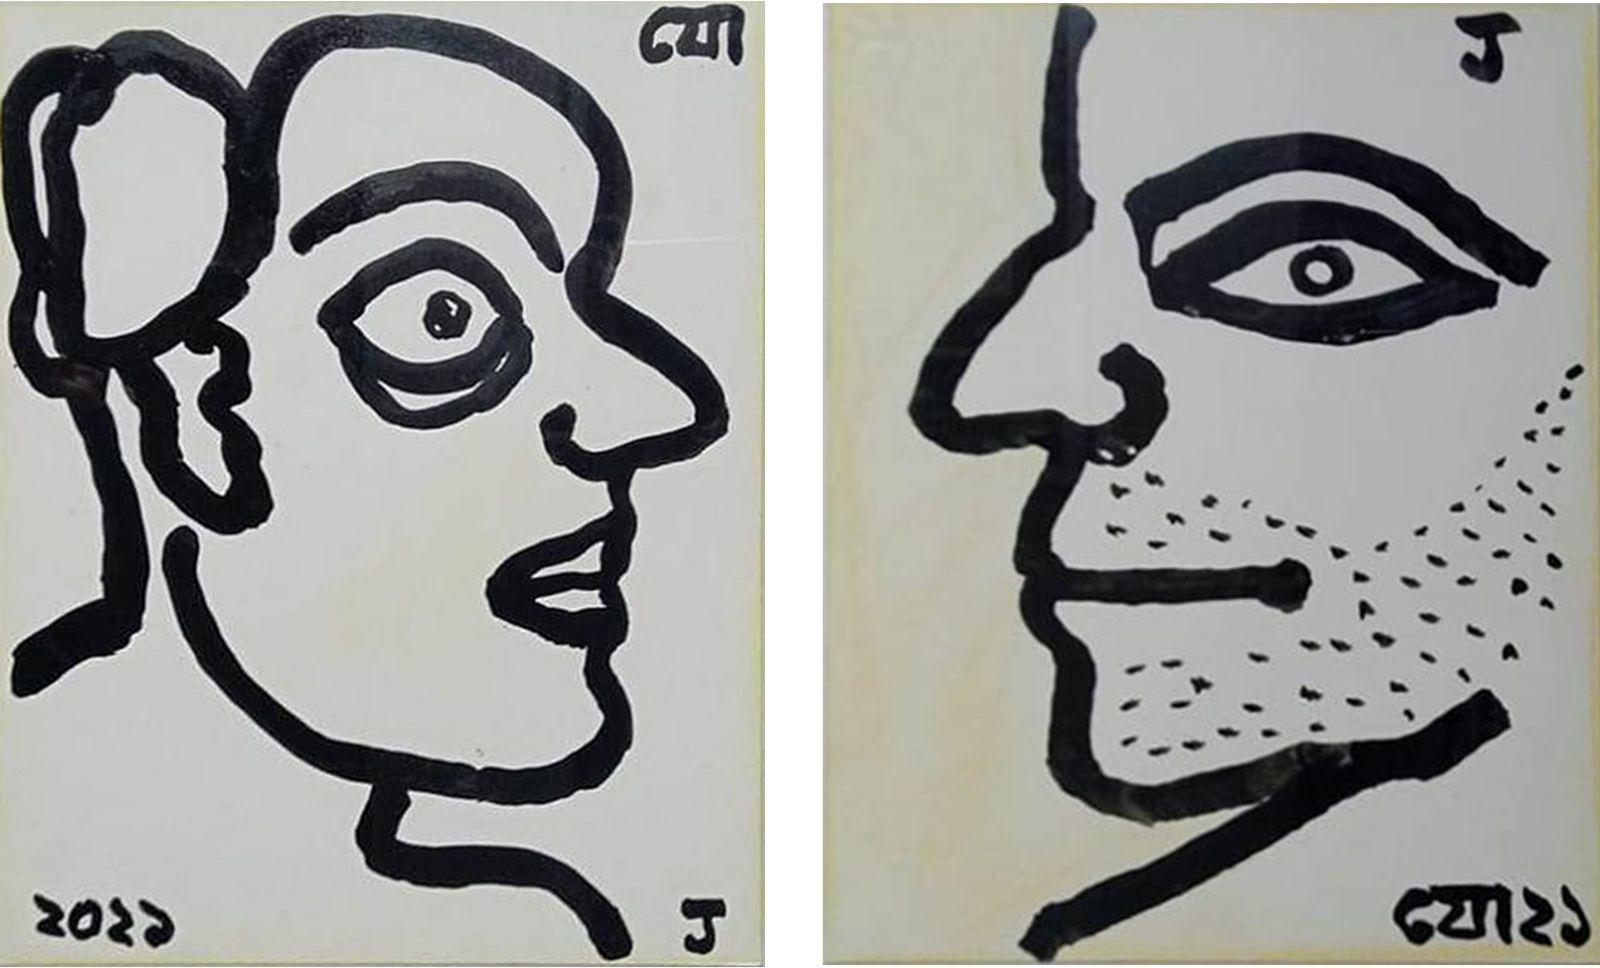 Jogen Chowdhury - Untitled - 10.8 x 8.5 inches (unframed size)  
Ink & Pastel on Paper, 2021 (each)
Set of 2 works
Signed in Bengali

Style : He has immense contribution in inspiring young artists of India. Jogen Chowdhury had developed his